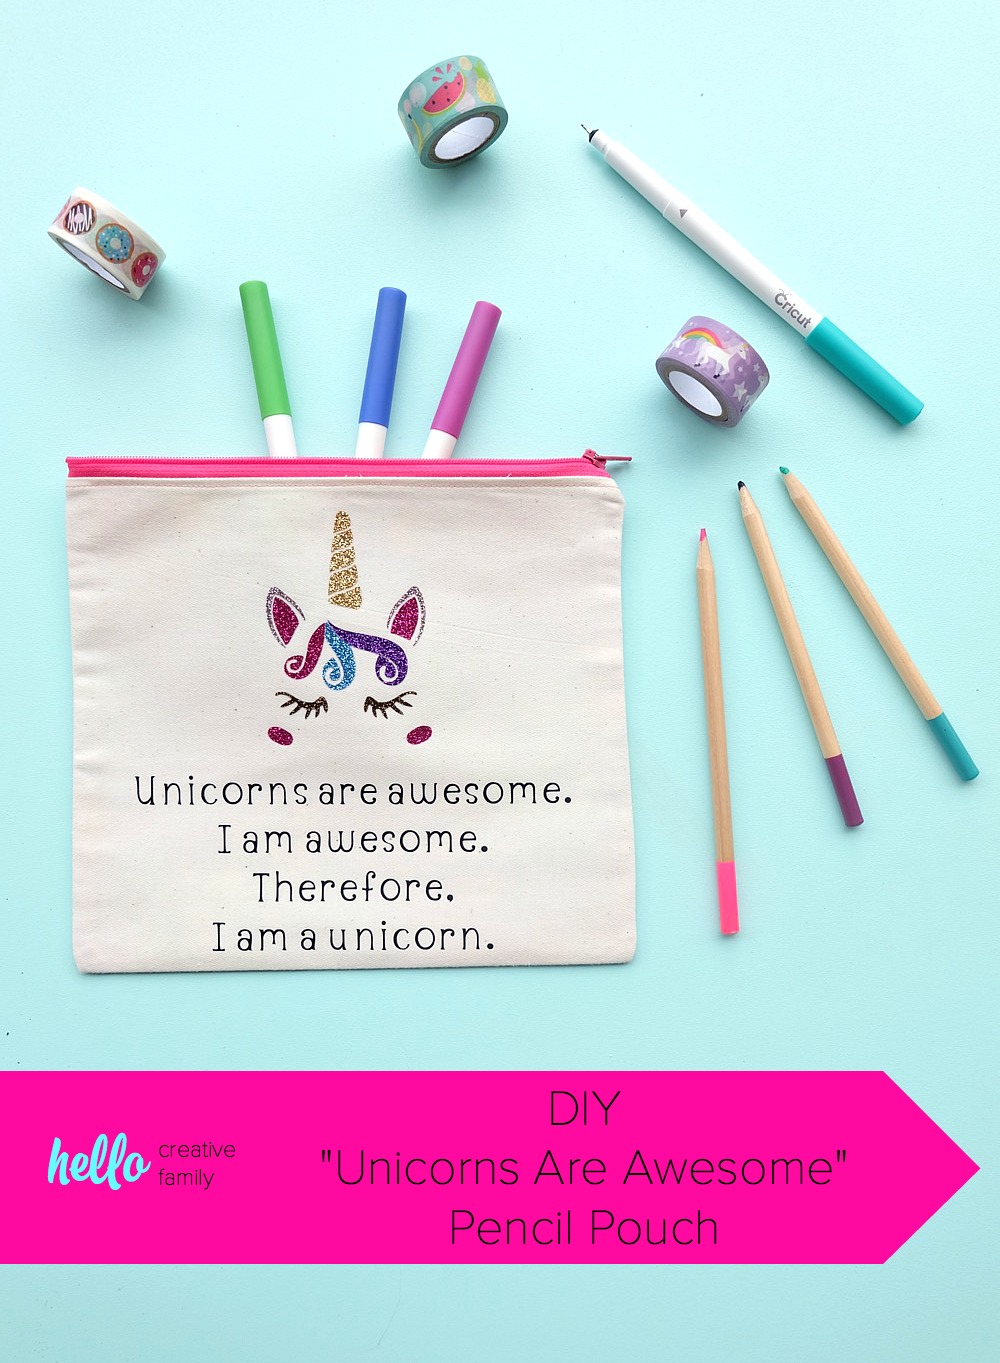 50 Easy Handmade Gift Ideas You'll Love: Unicorns Are Awesome DIY Pencil Pouch Clutch